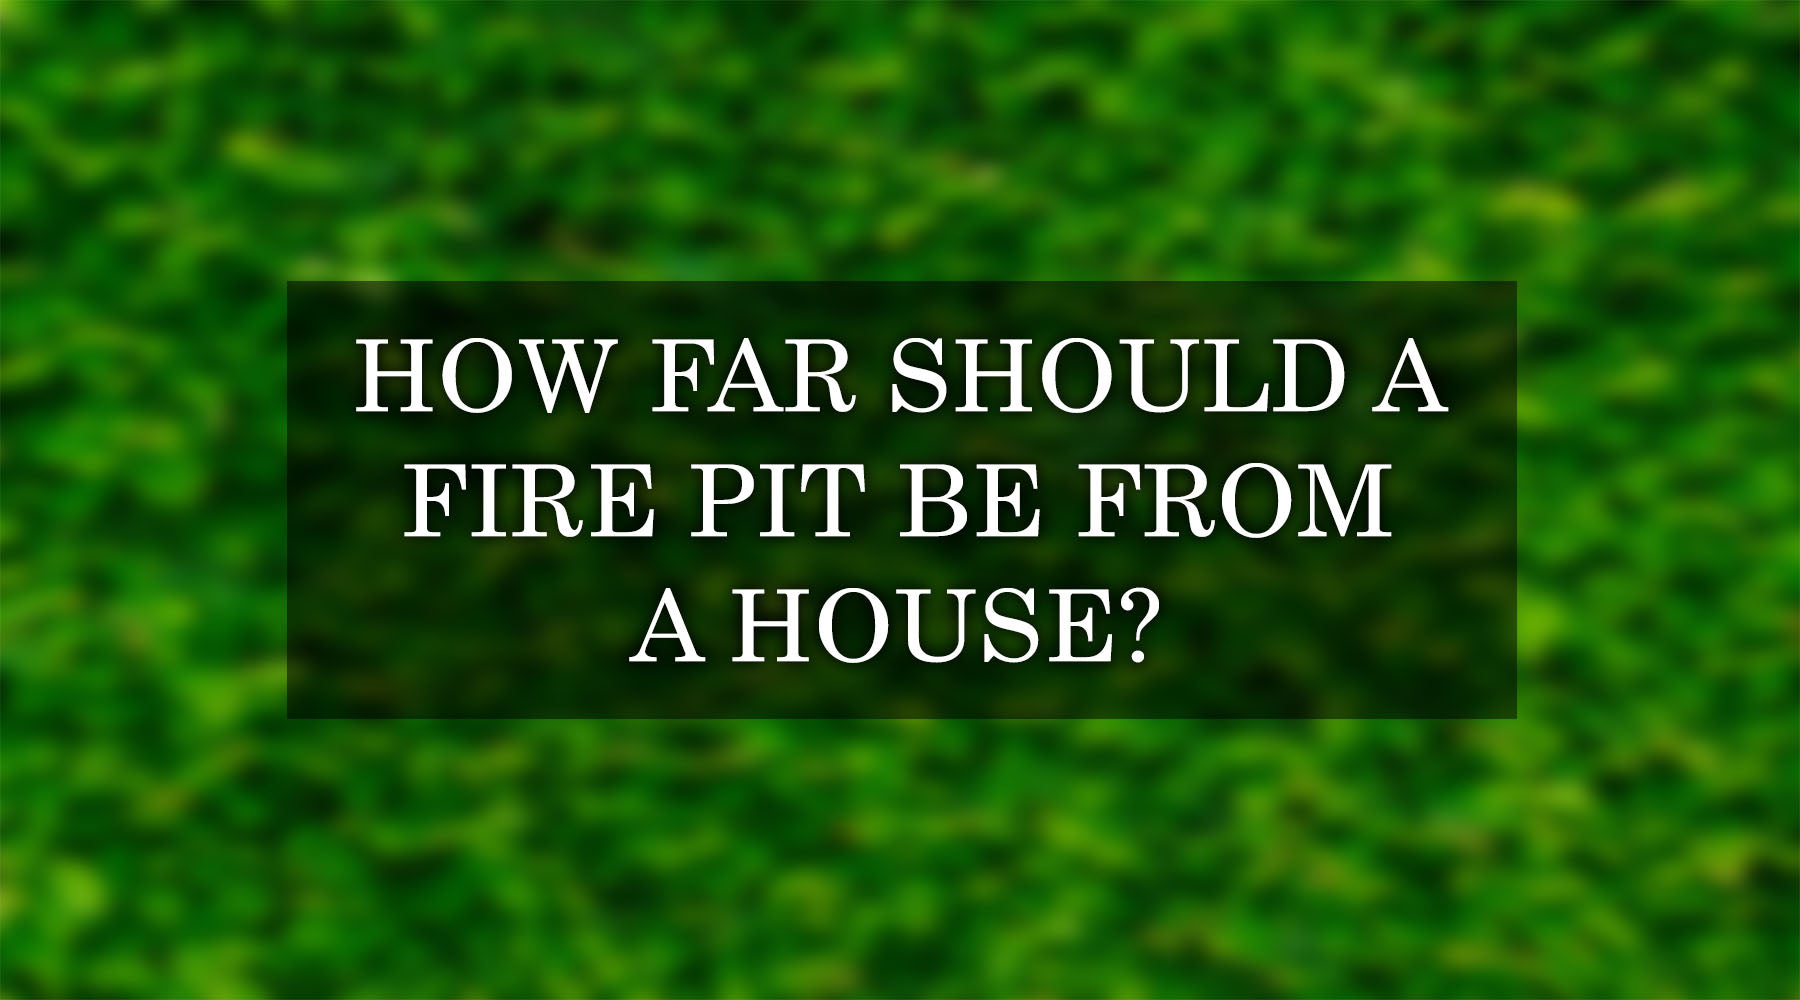 How Far Should a Fire Pit Be from a House? Let's Find Out